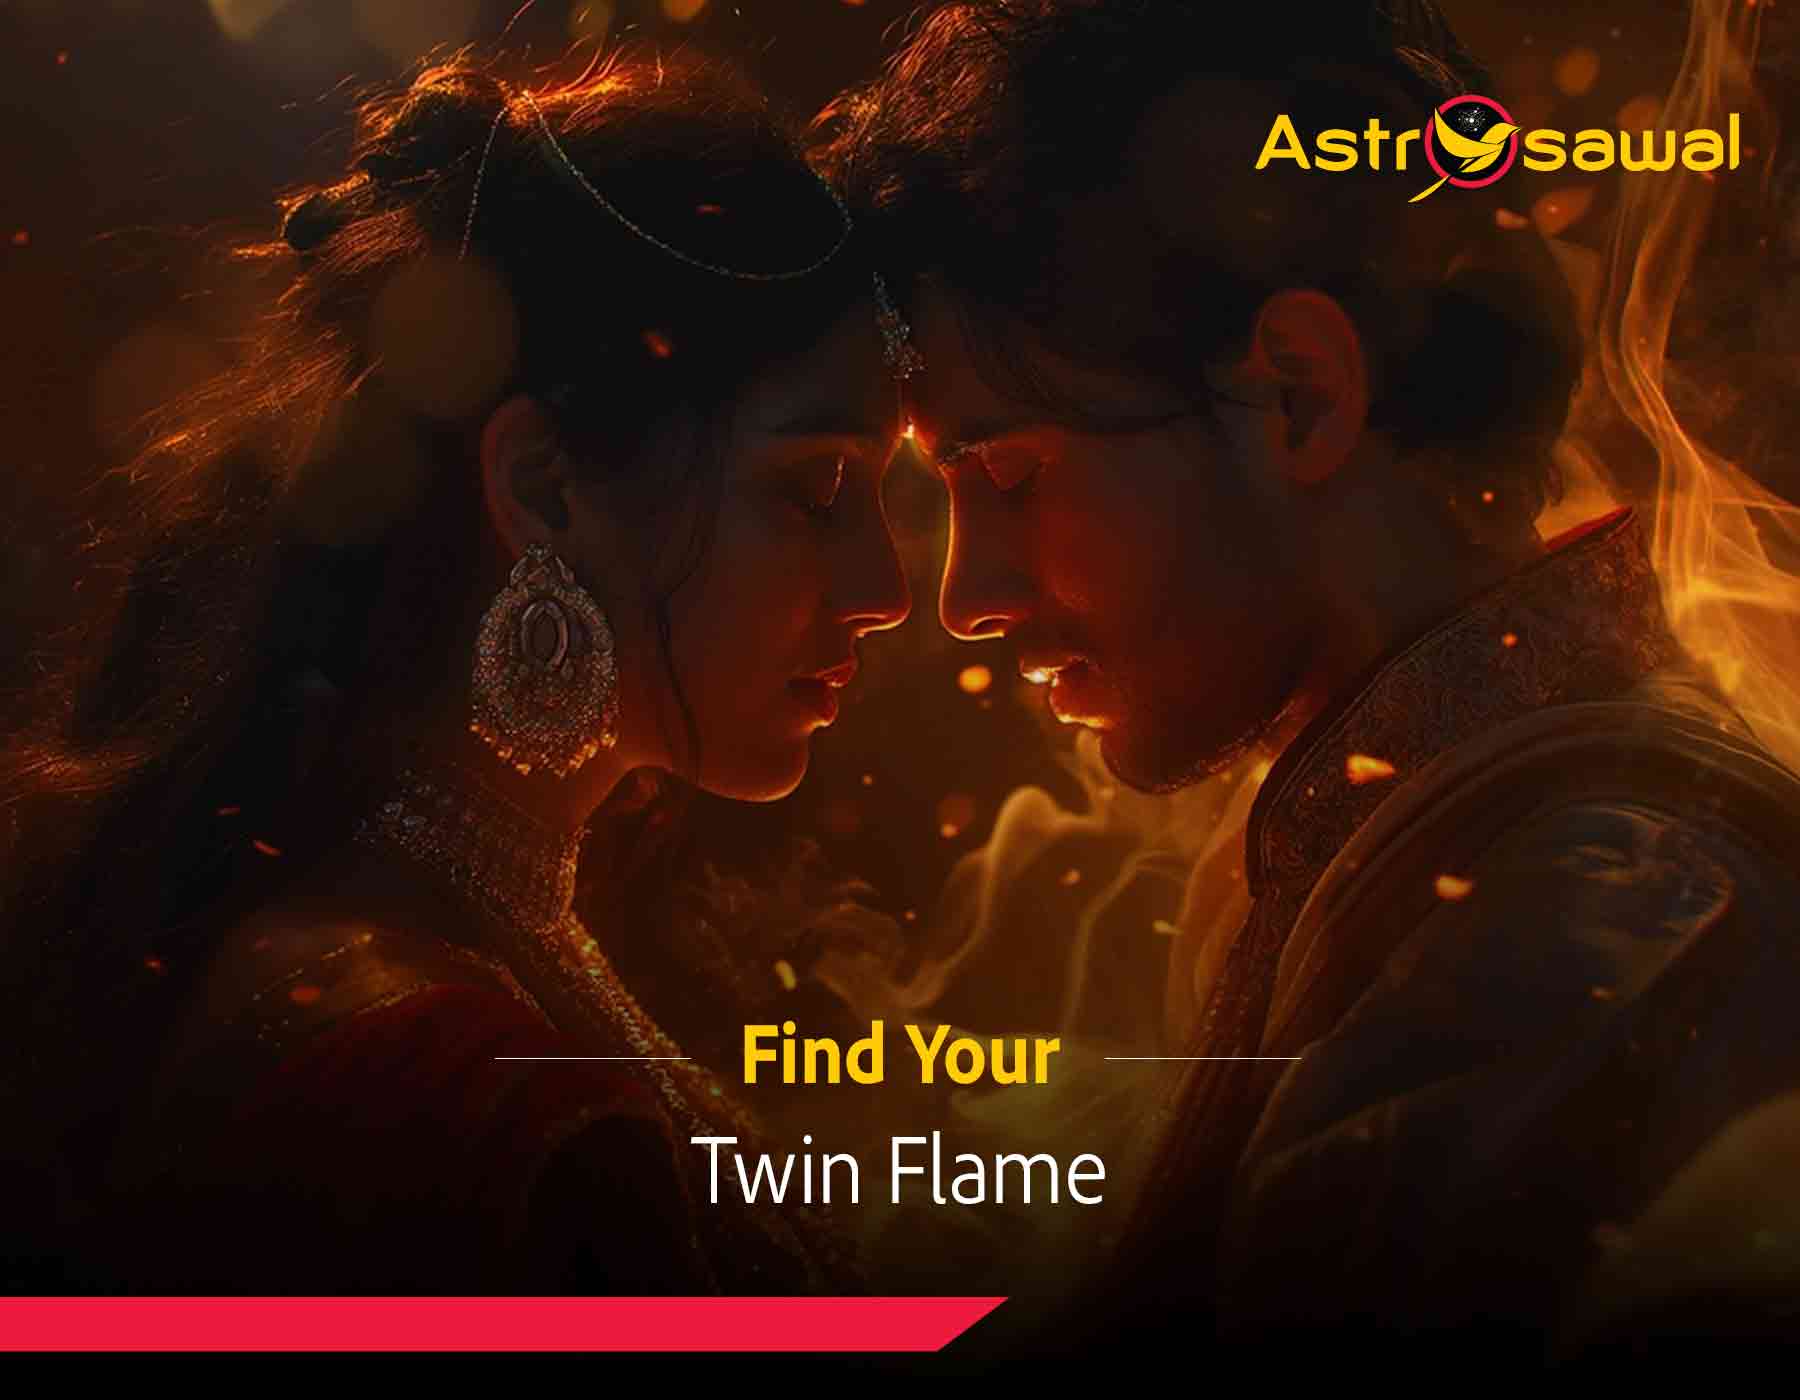 Find your Twin flame: Connecting with Your Spiritual Partner